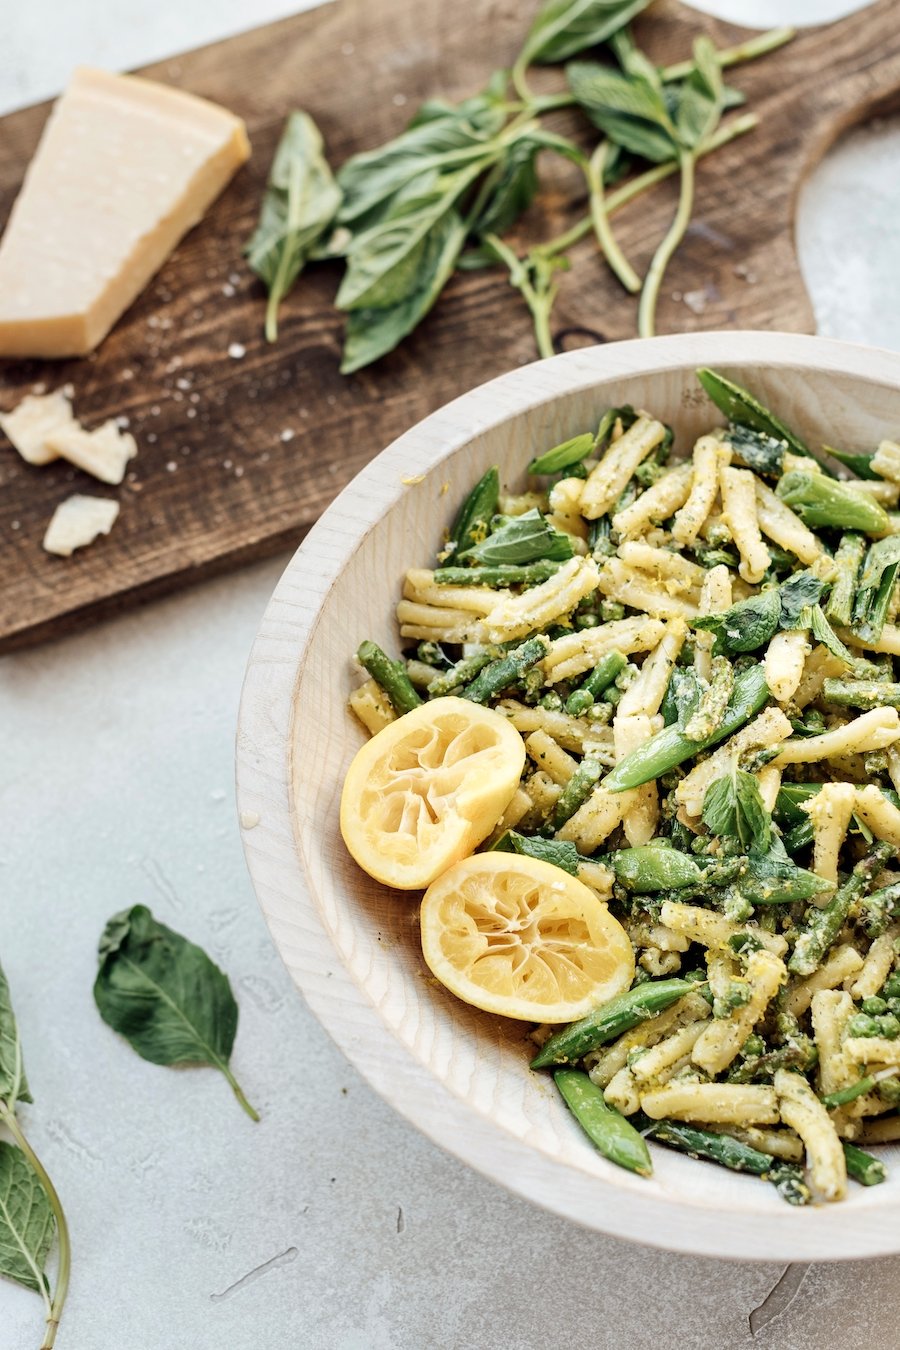 Pesto Pasta Primavera Is the Summer Pasta I Make At Least Once a Week